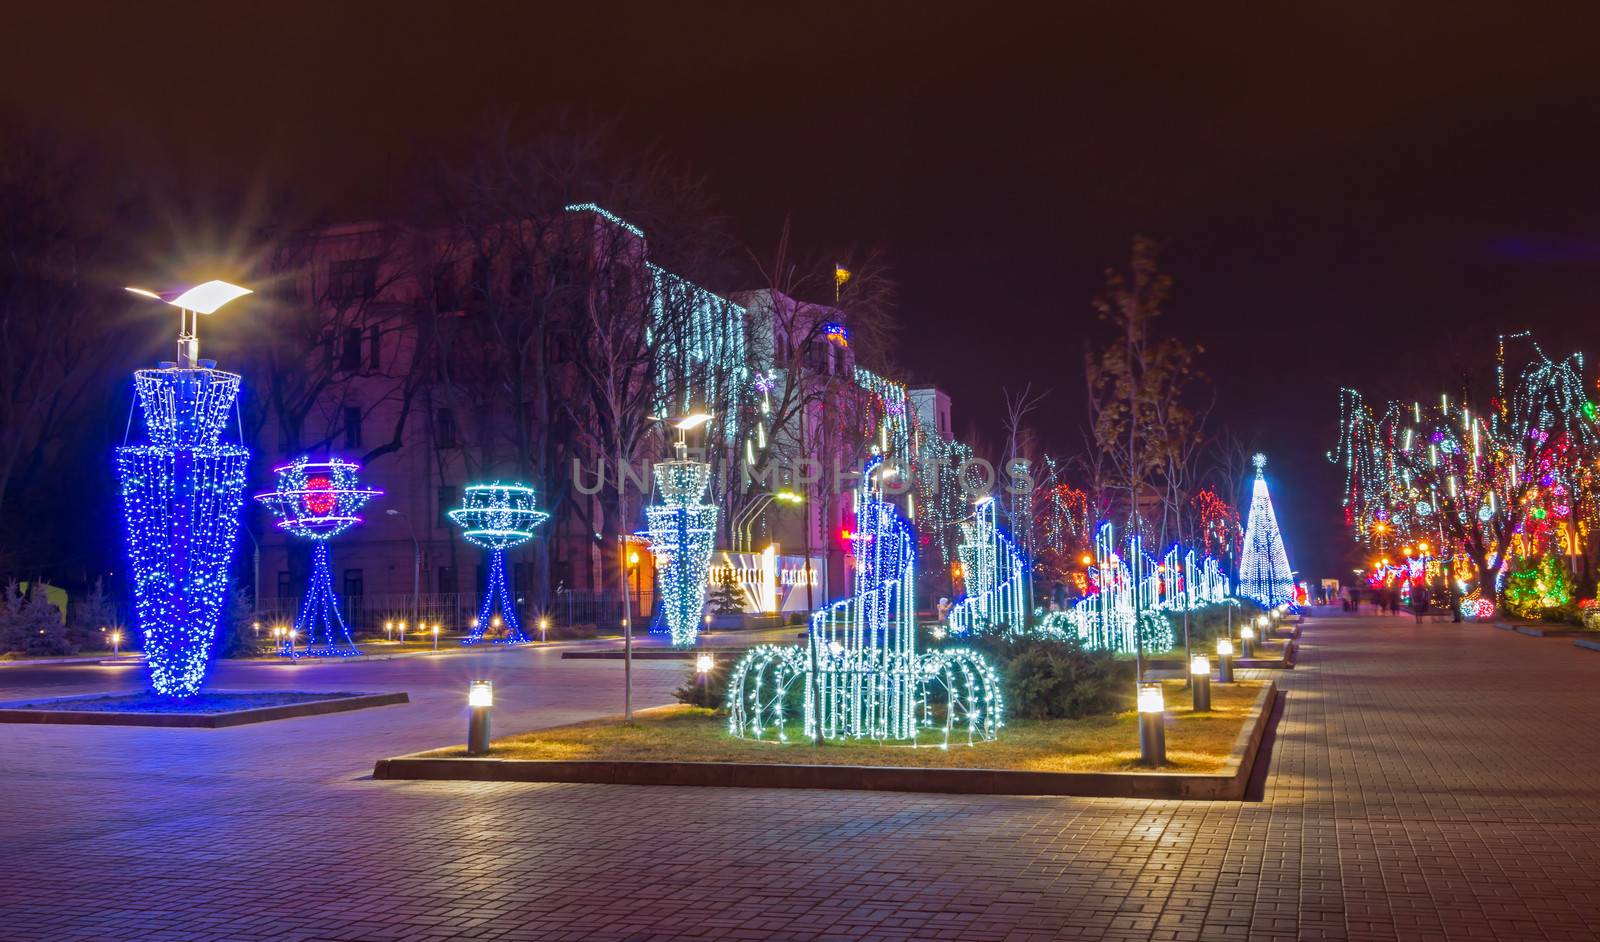 Christmas lighting at the park area on the night of the baptism in January 2014.